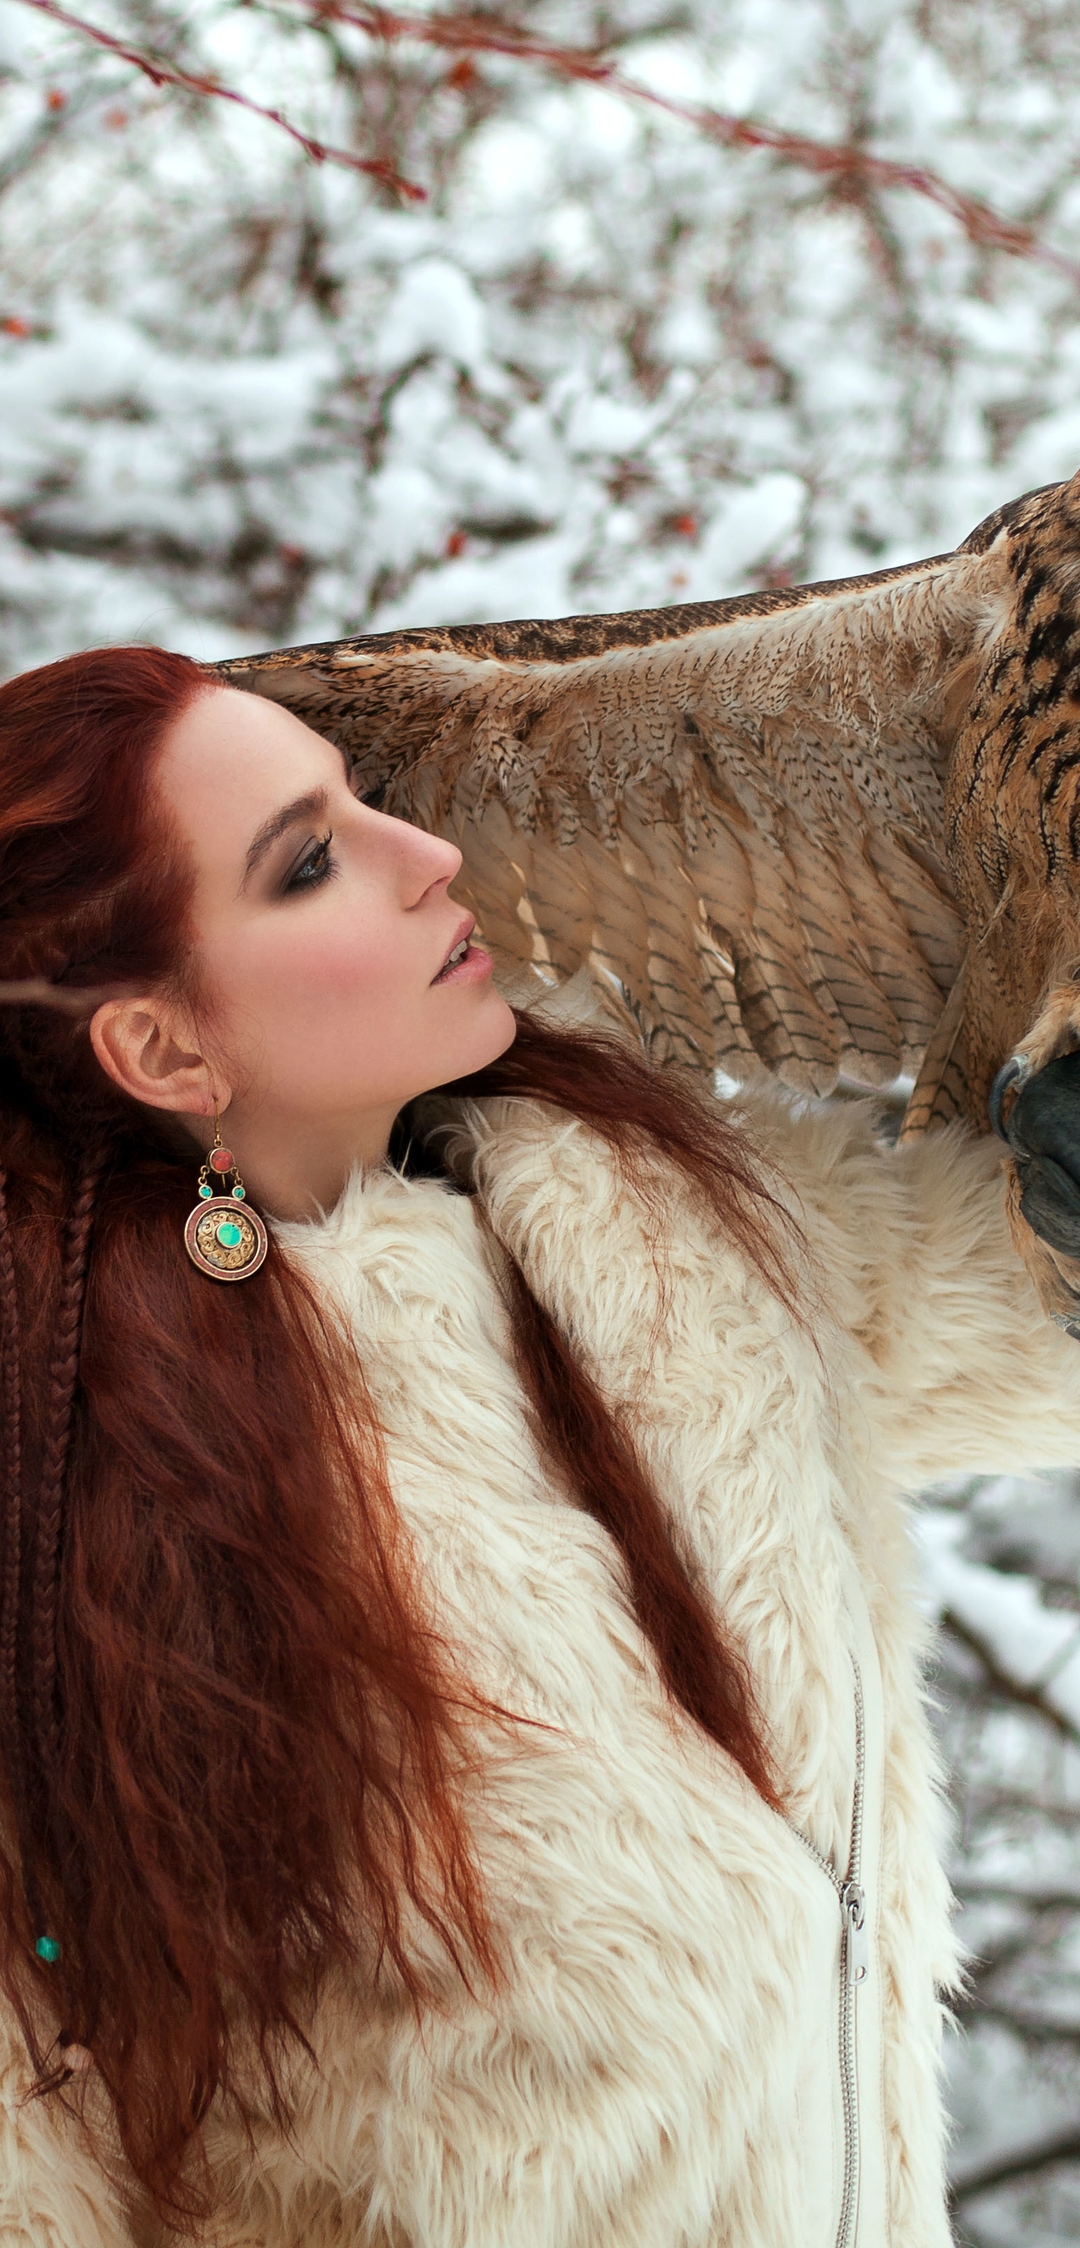 Image: Girl, red hair, glove, bird, long-eared owl, owl, wing, branches, winter